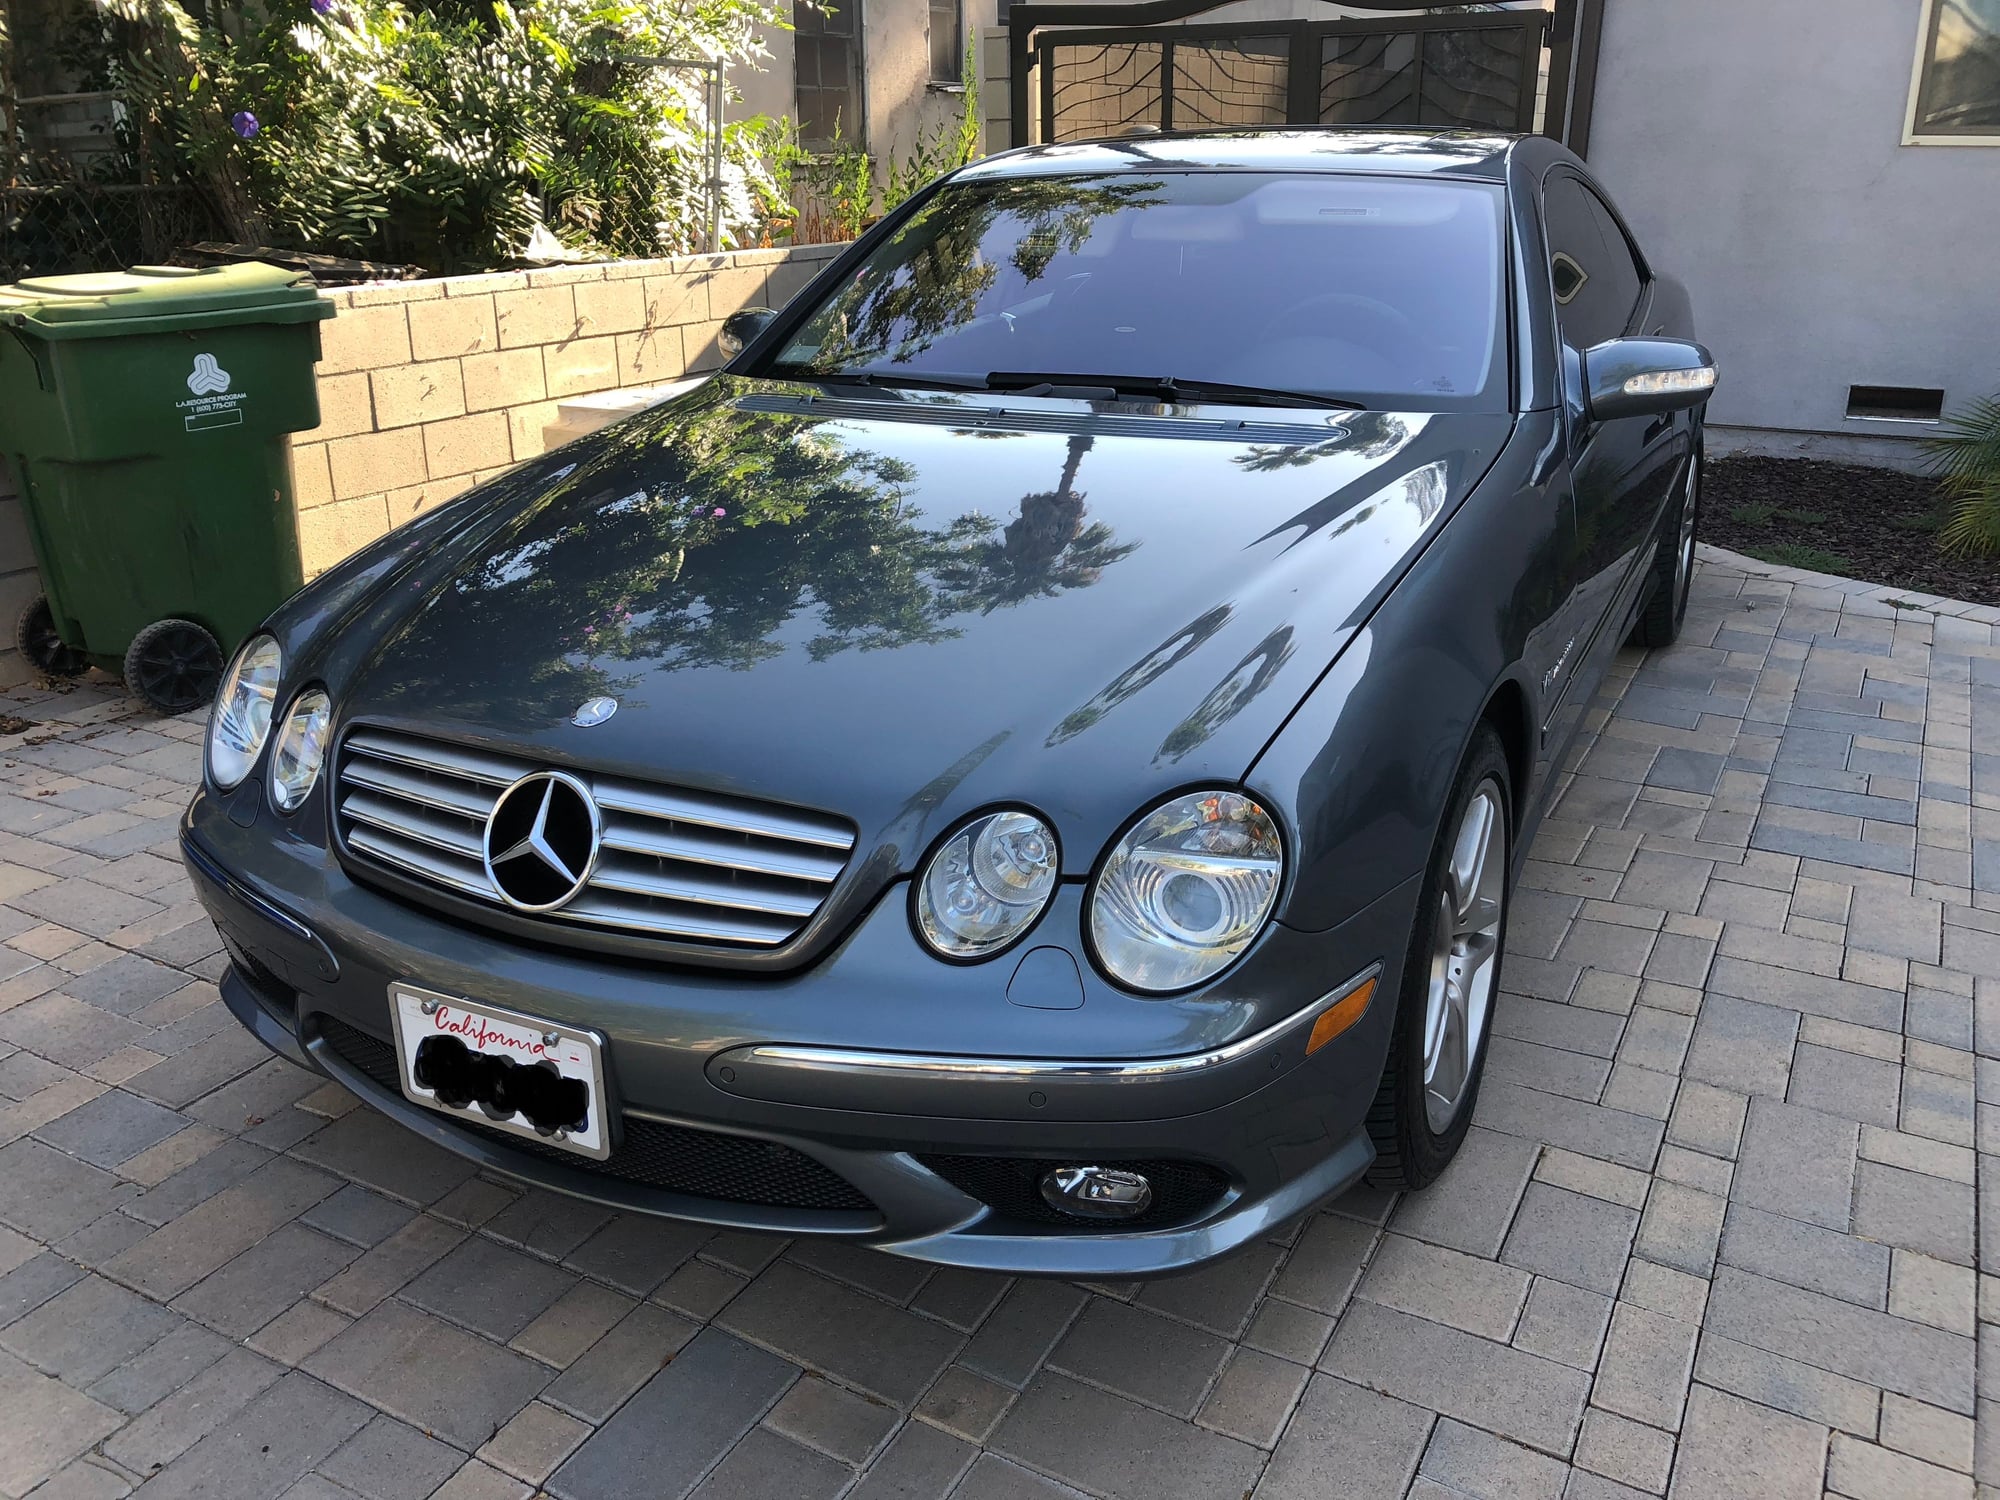 2005 Mercedes-Benz CL55 AMG - 2005 Mercedes-Benz CL55 AMG - Used - VIN WDBPJ74J55A046303 - 115,000 Miles - 8 cyl - 2WD - Automatic - Coupe - Gray - Monrovia, CA 91010, United States